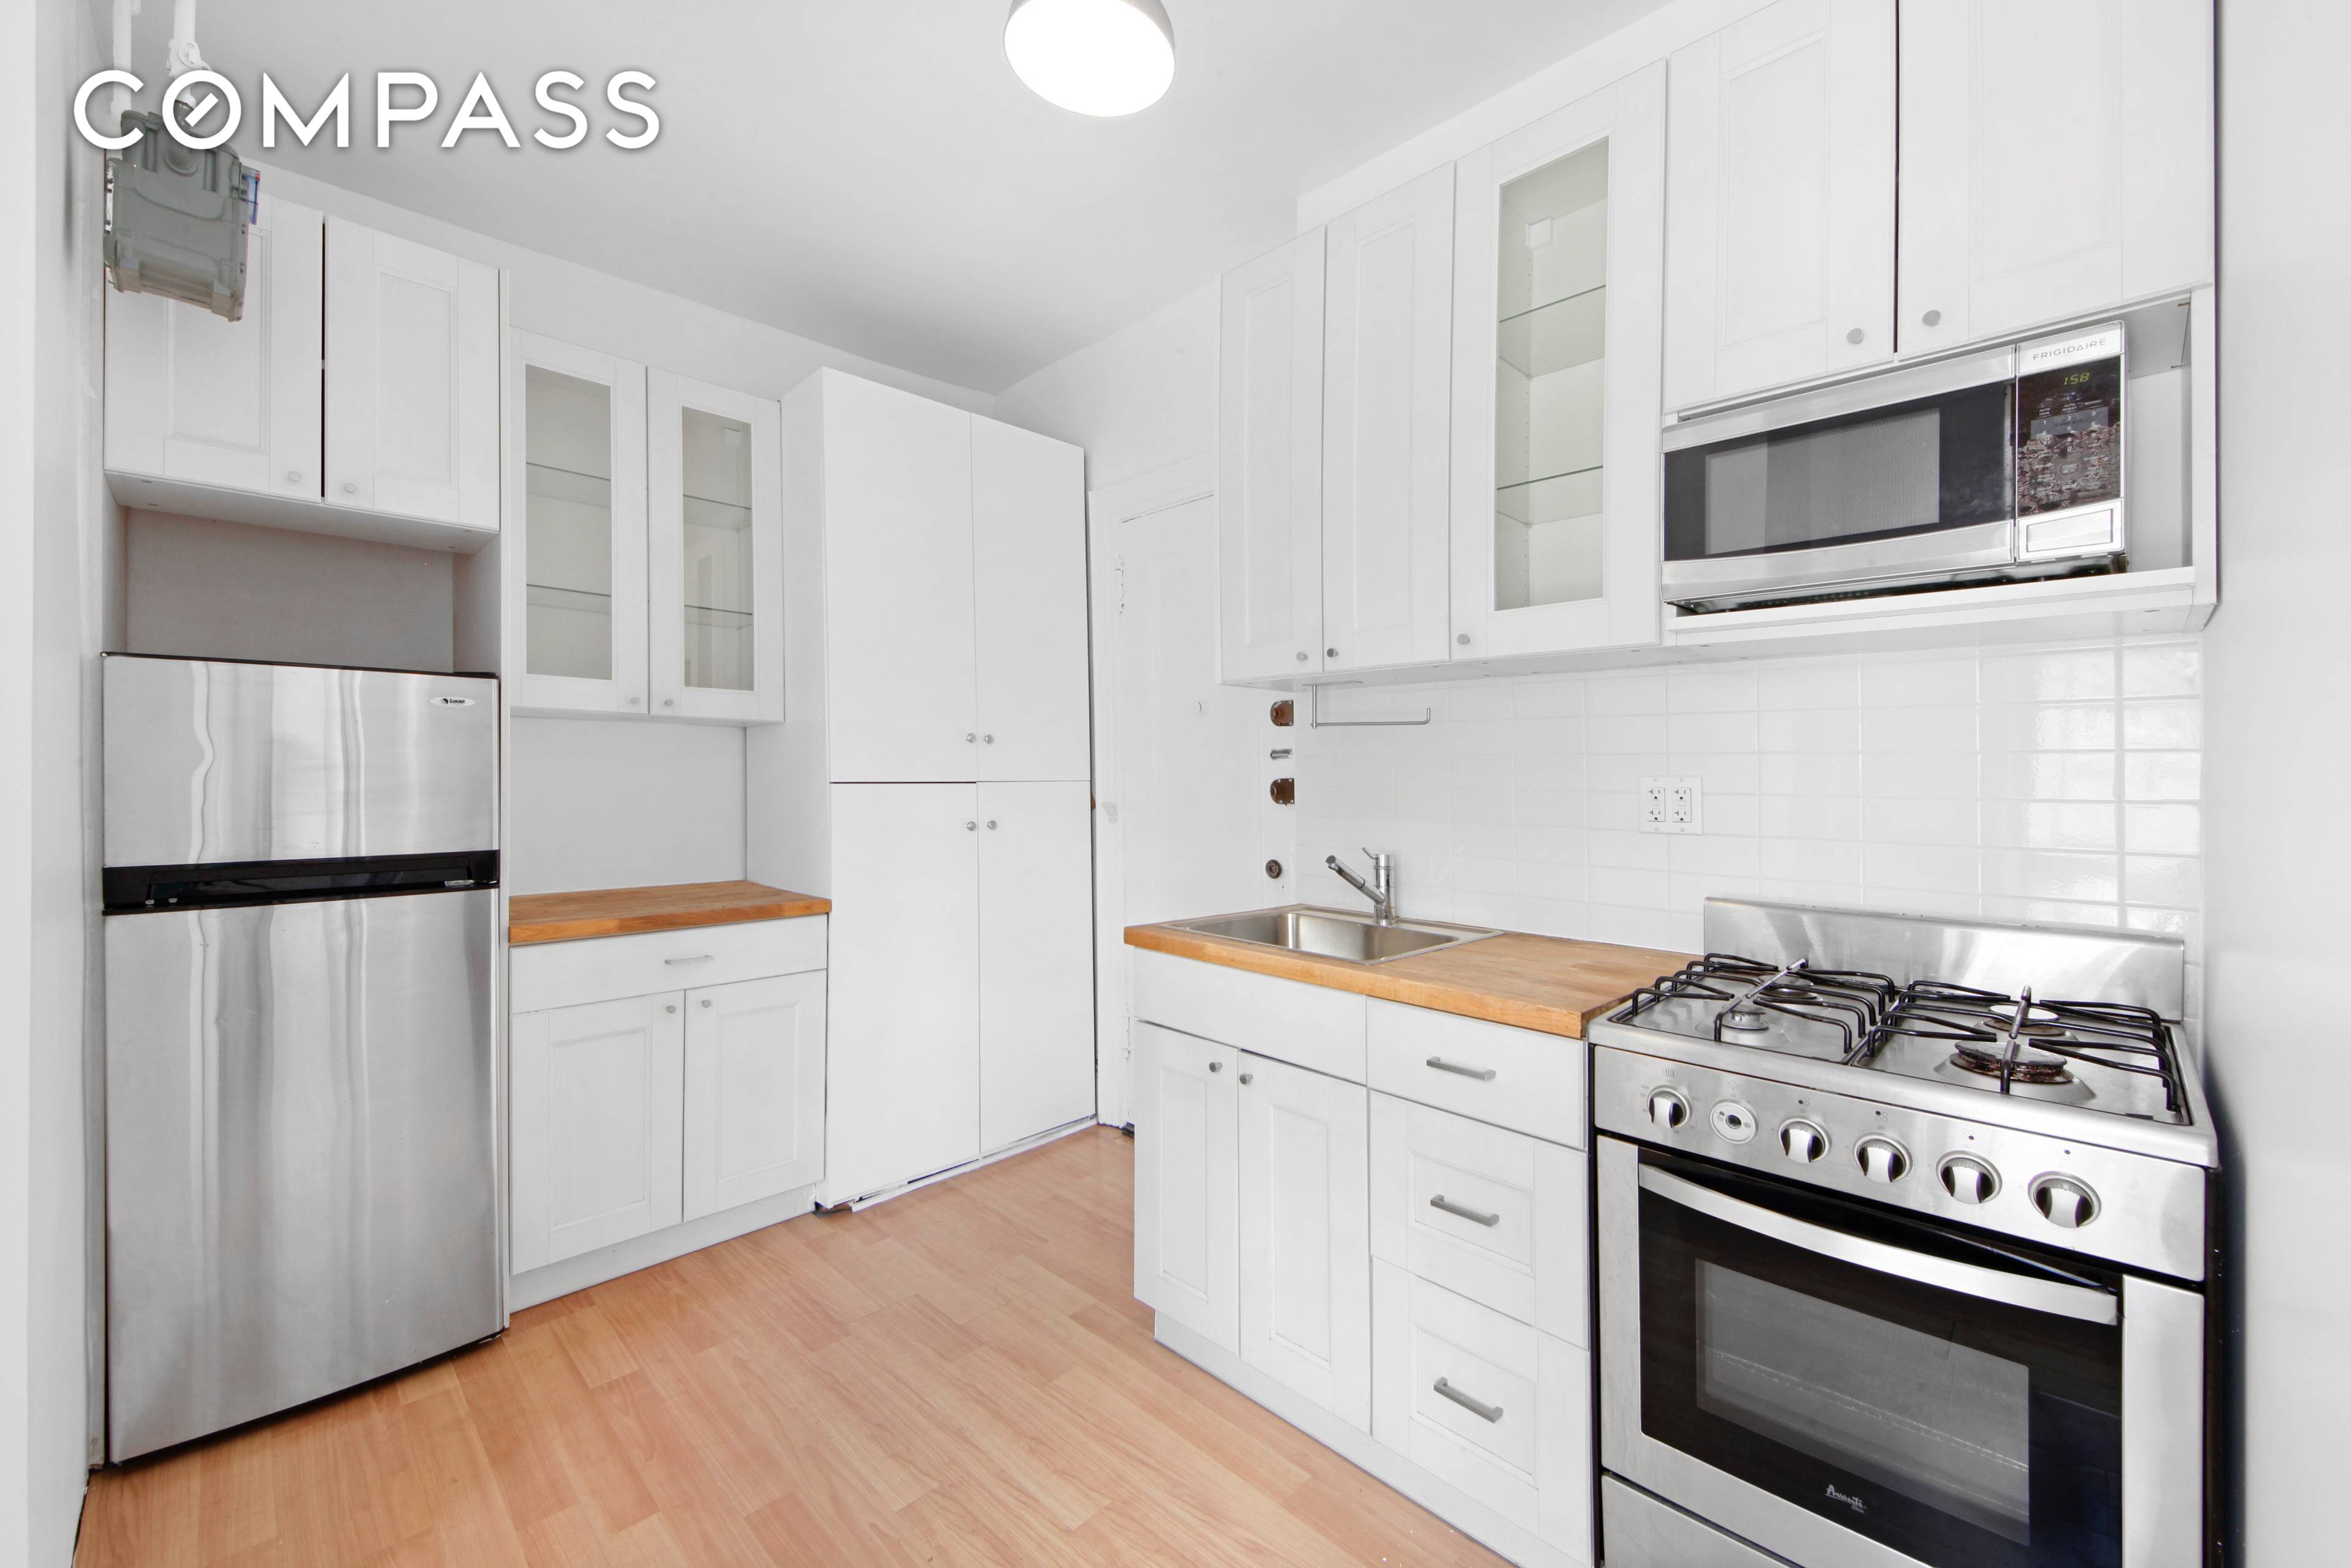 Flexible sublet policy, investor friendly, leasing from day 1 allowed.